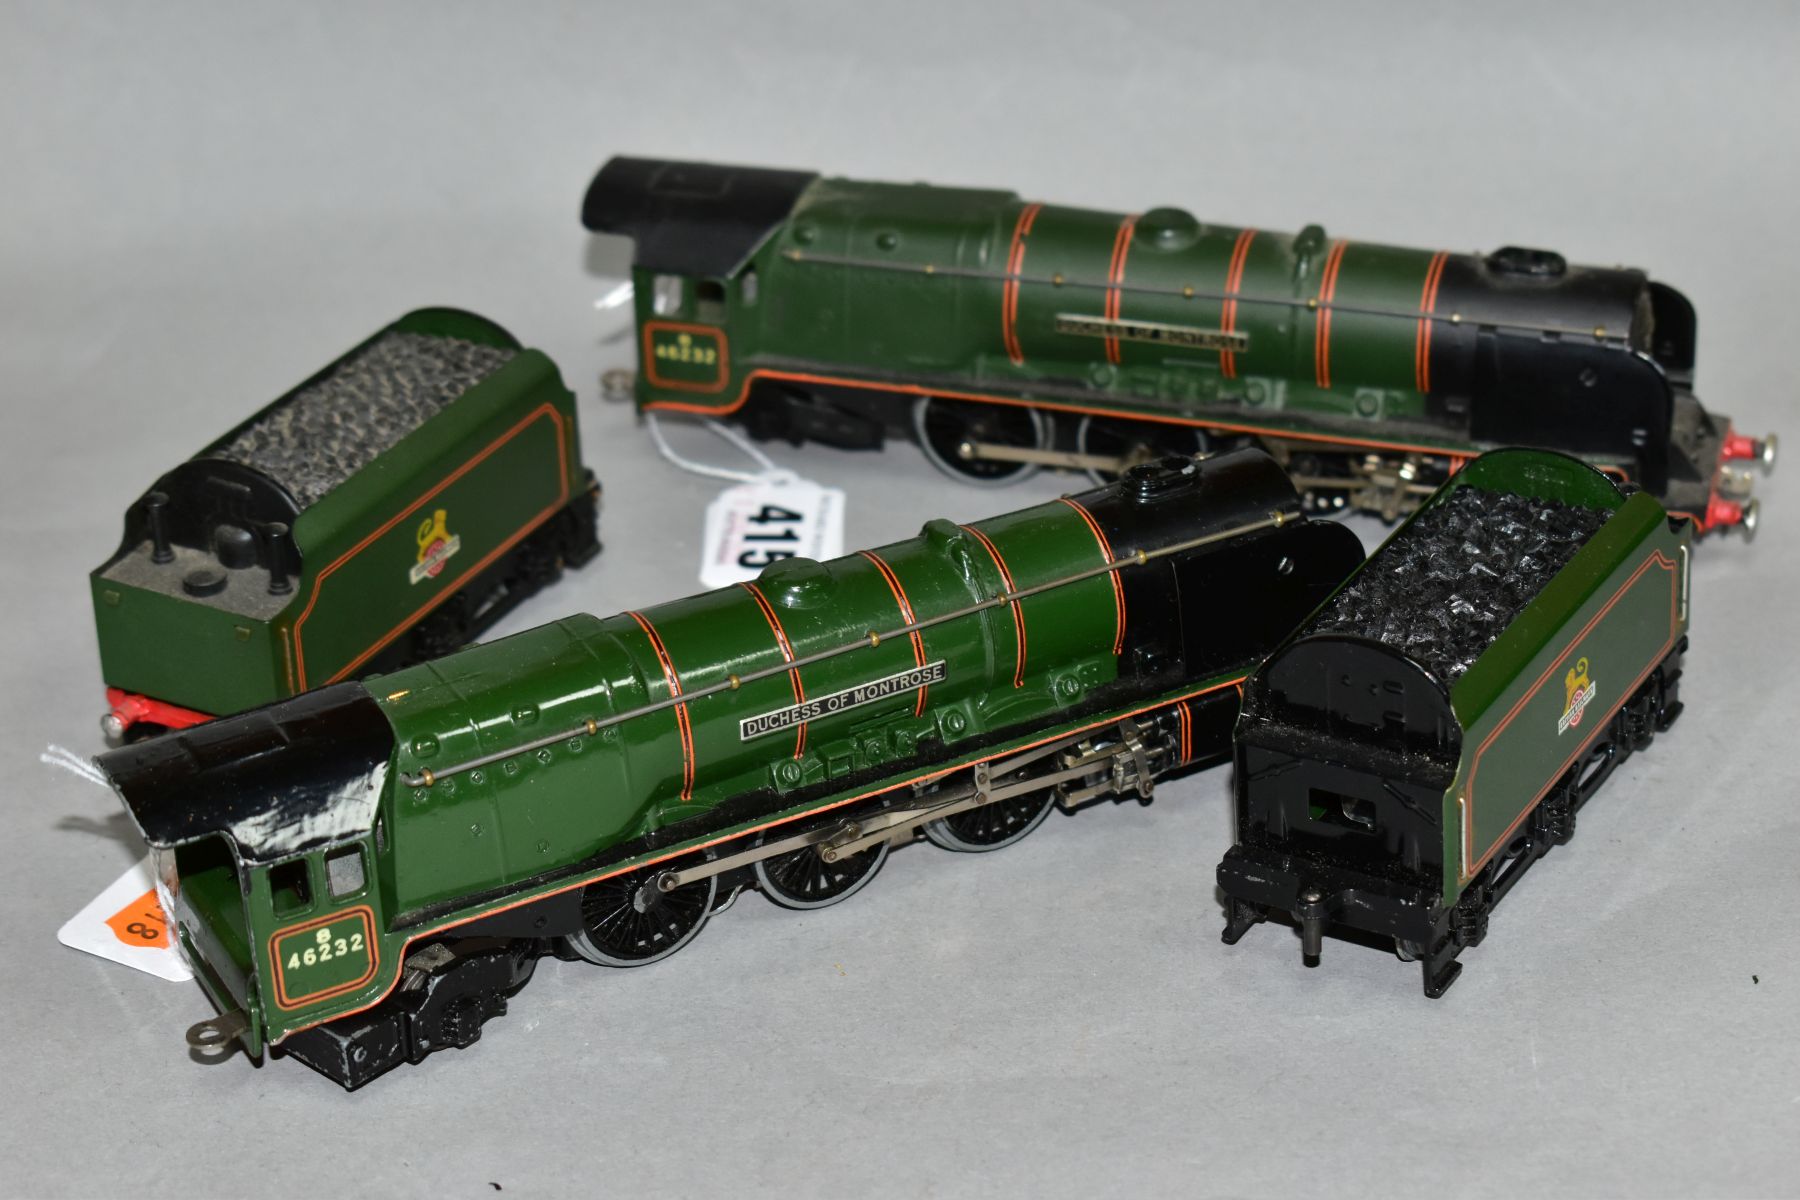 TWO UNBOXED HORNBY DUBLO DUCHESS CLASS LOCOMOTIVES, 'Duchess of Montrose' No 46232 (EDL12), both - Image 4 of 5